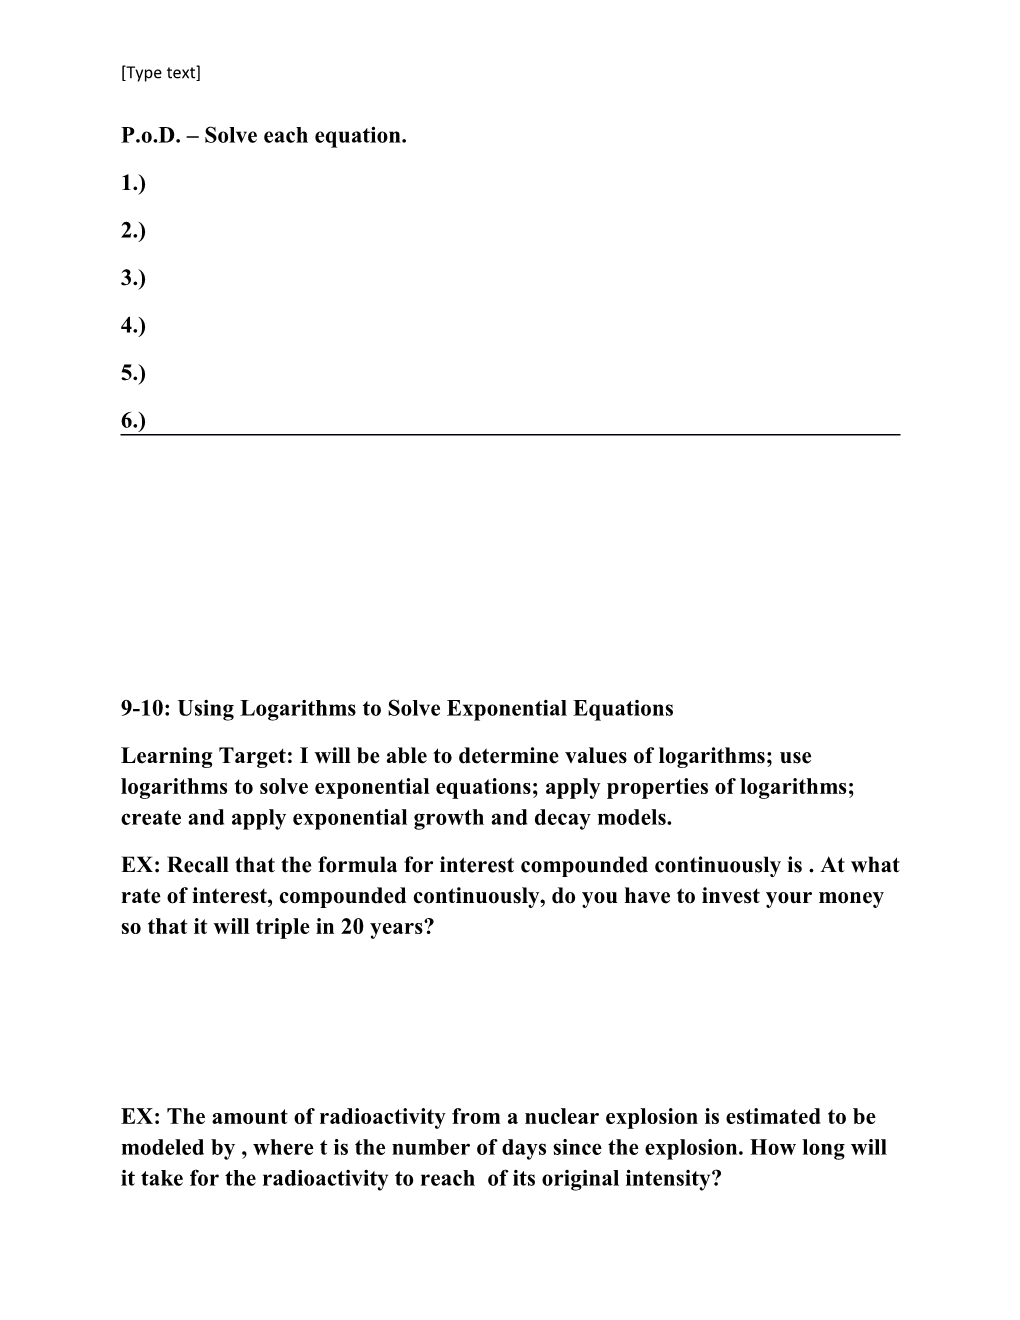 9-10: Using Logarithms to Solve Exponential Equations